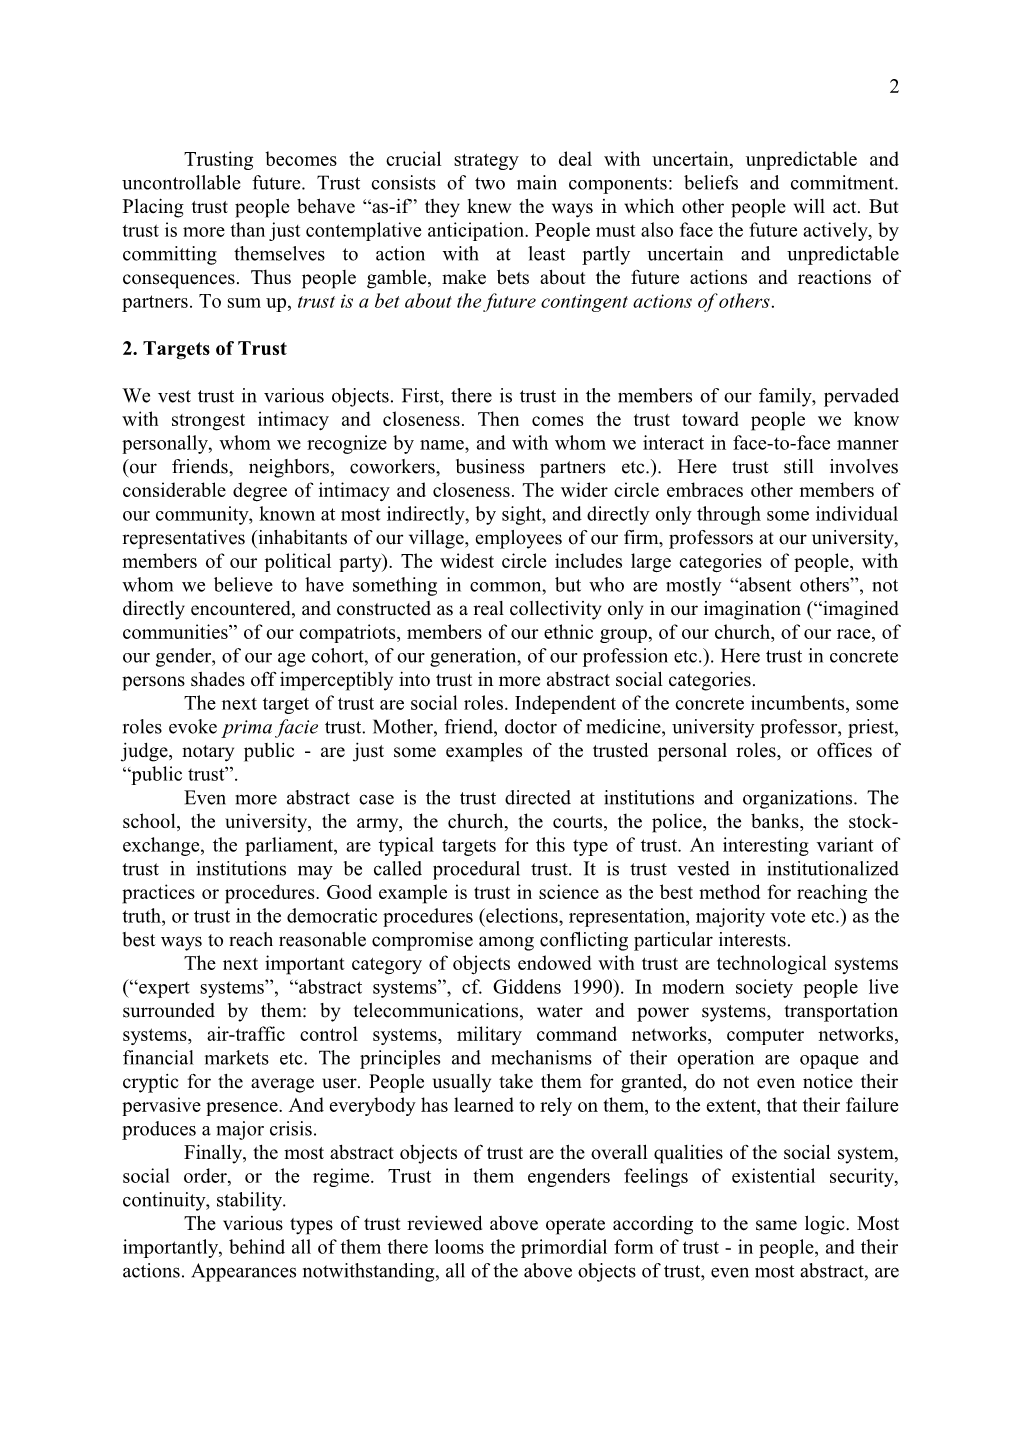 Background Paper for the Project Honesty and Trust